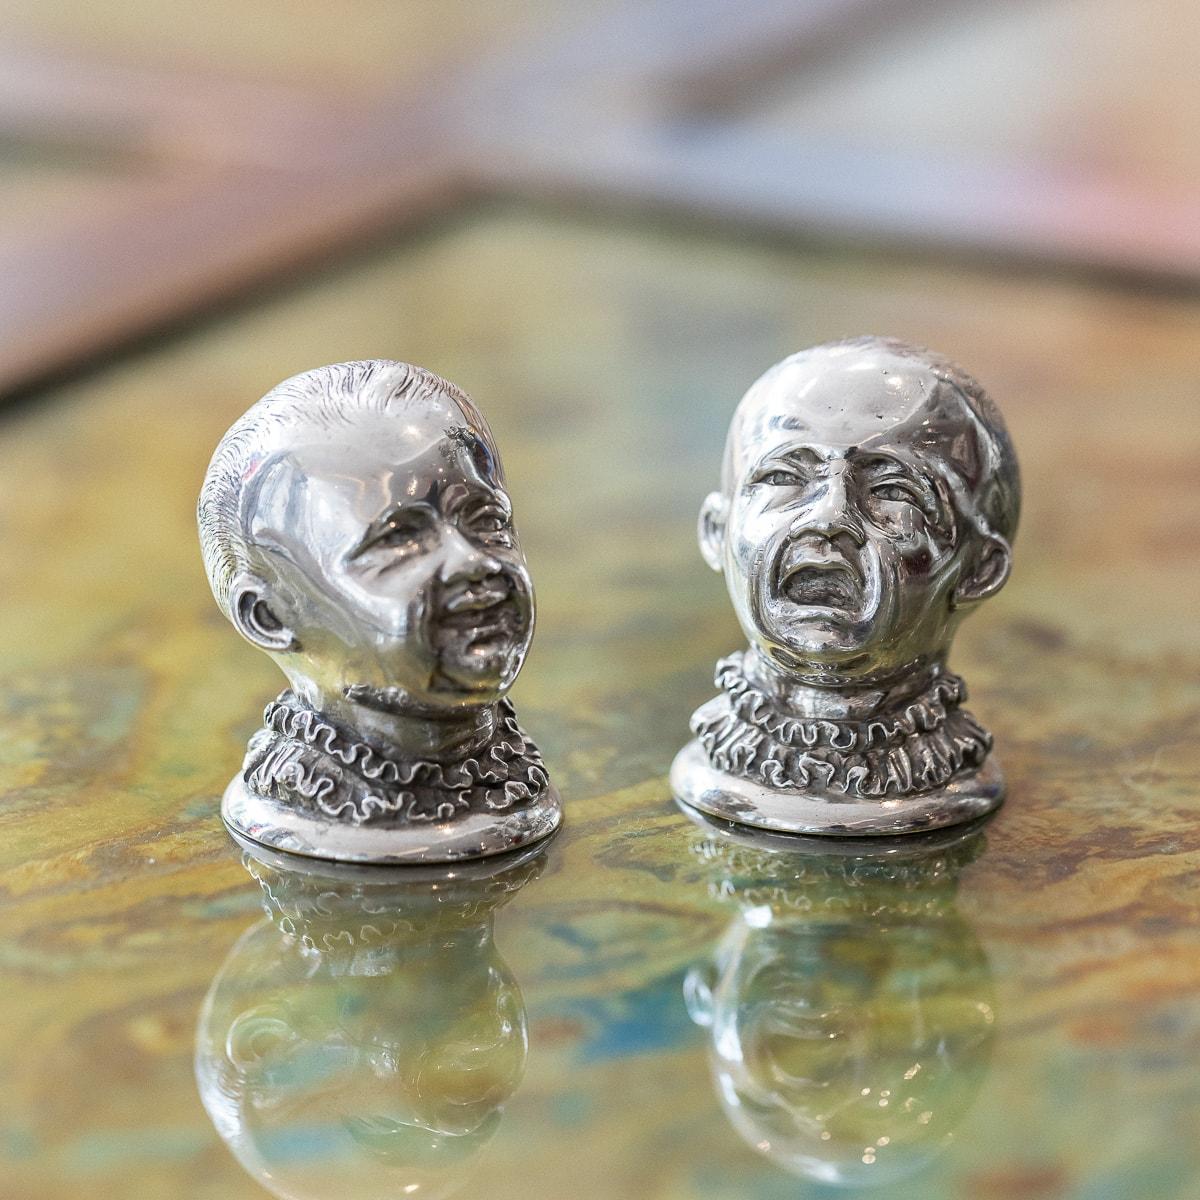 Antique 19th Century Victorian very rare pair of novelty cast solid silver table salt & pepper, realistically modelled as two childrens heads, one laughing and the other crying, with screw lids to the base. Both hallmarked English silver (925